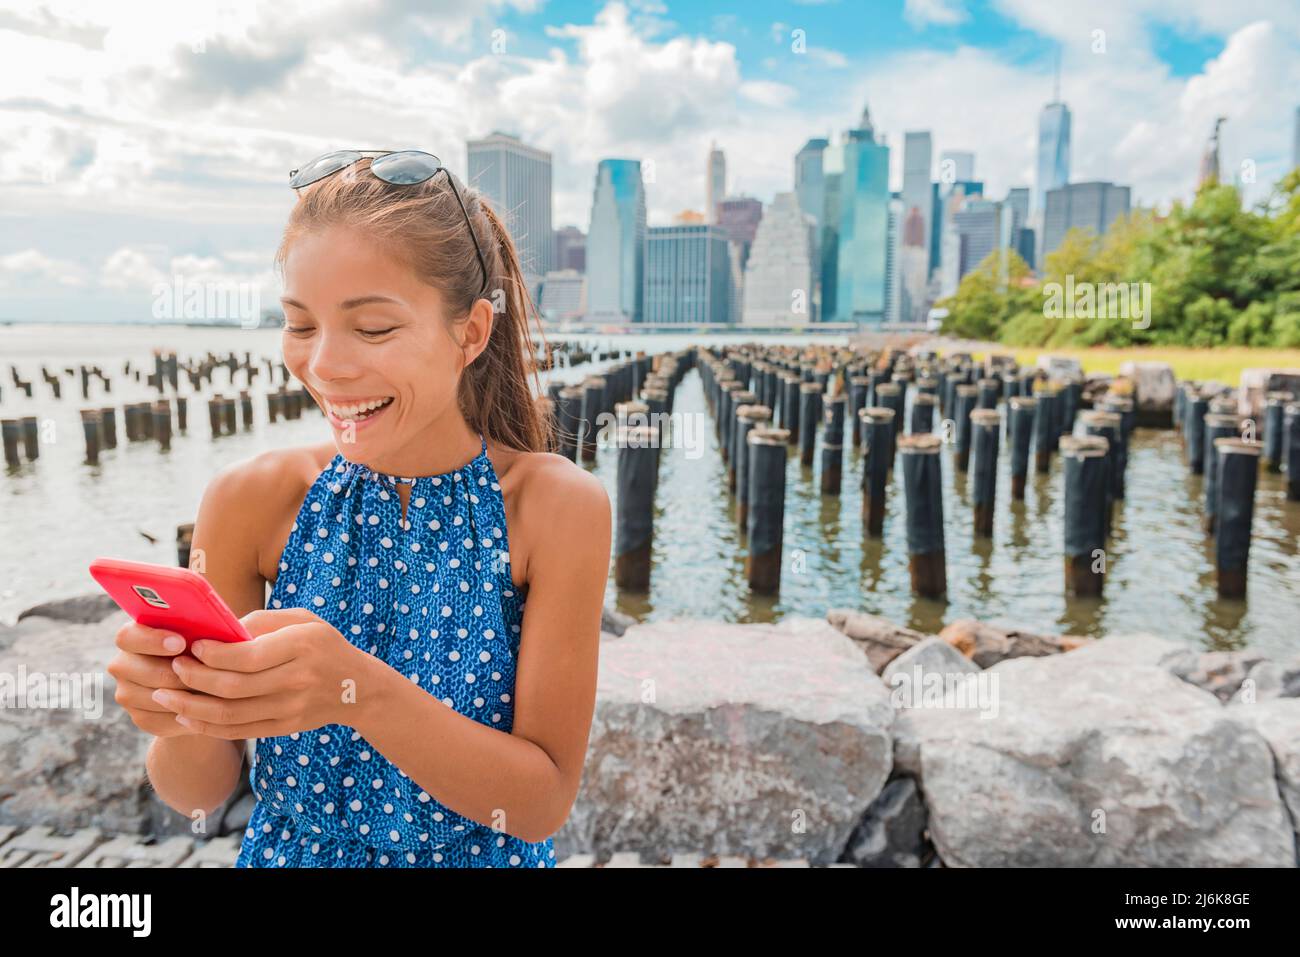 New York tourist woman using app on phone by Manhattan city skyline waterfront. People walking enjoying view of downtown from the Brooklyn Bridge park Stock Photo